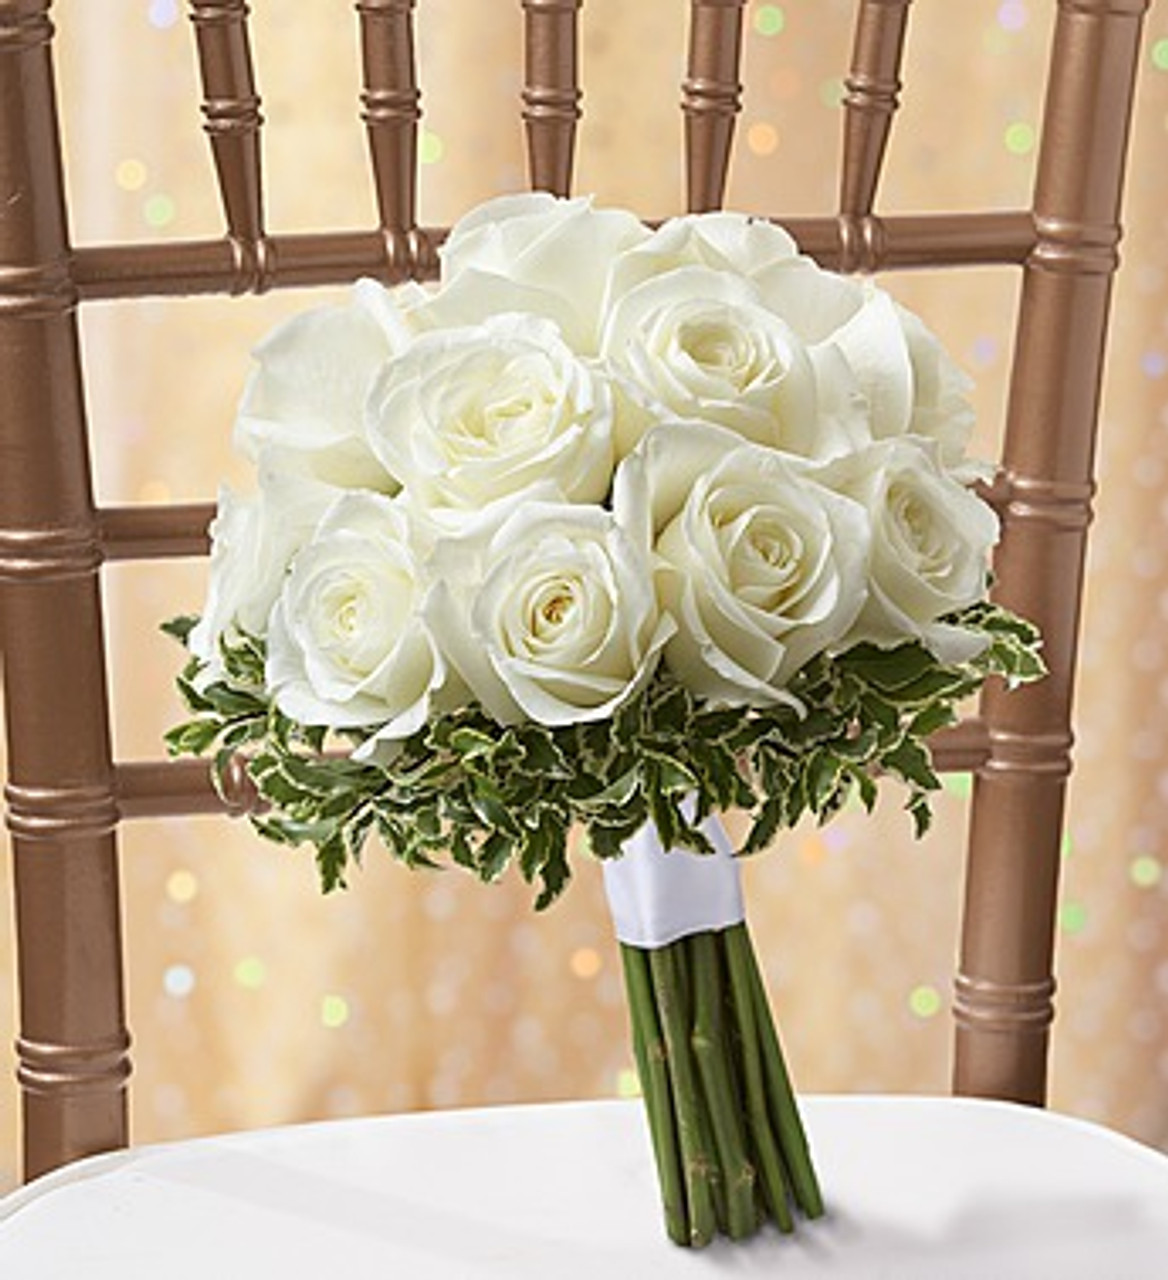 Sunflower and Roses Bouquet, Satin Ribbon Rose Bouquet, Happy Birthday  Bouquet, Ribbon Rose Arrangement, Artificial Flower 